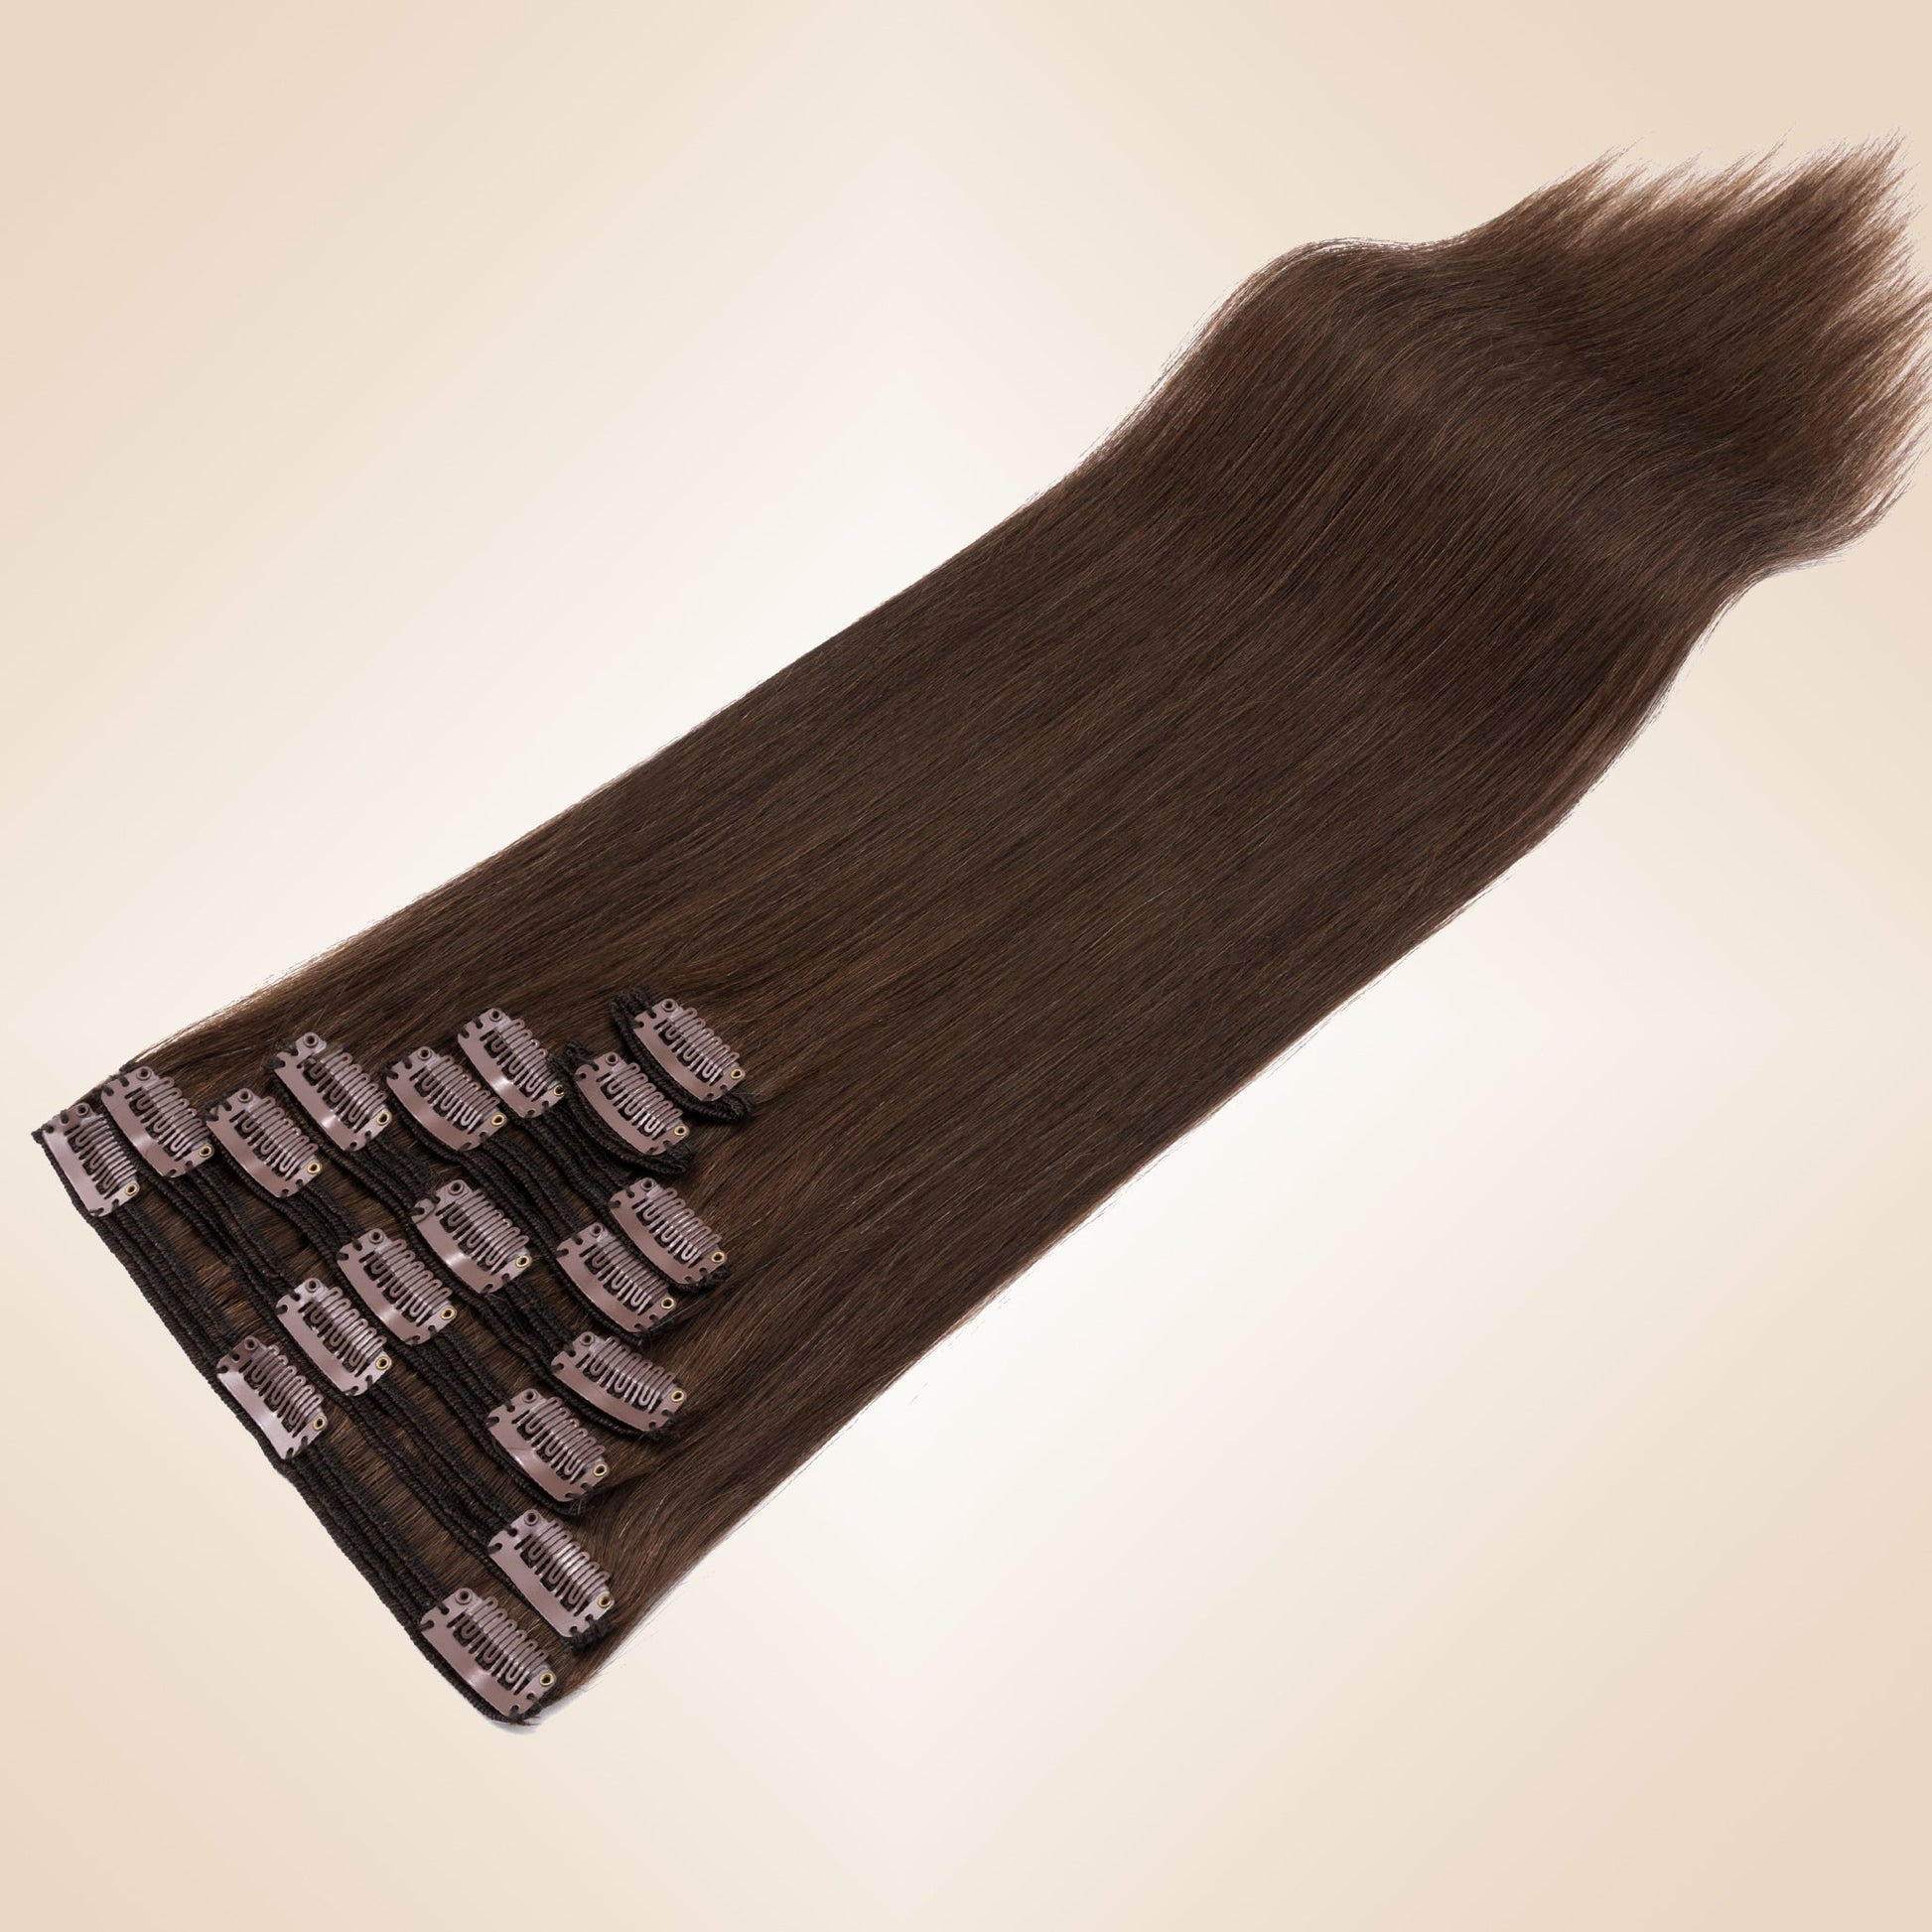 Double Wefts Medium Brown Clip In Hair Extensions 8 PCS segohair.com